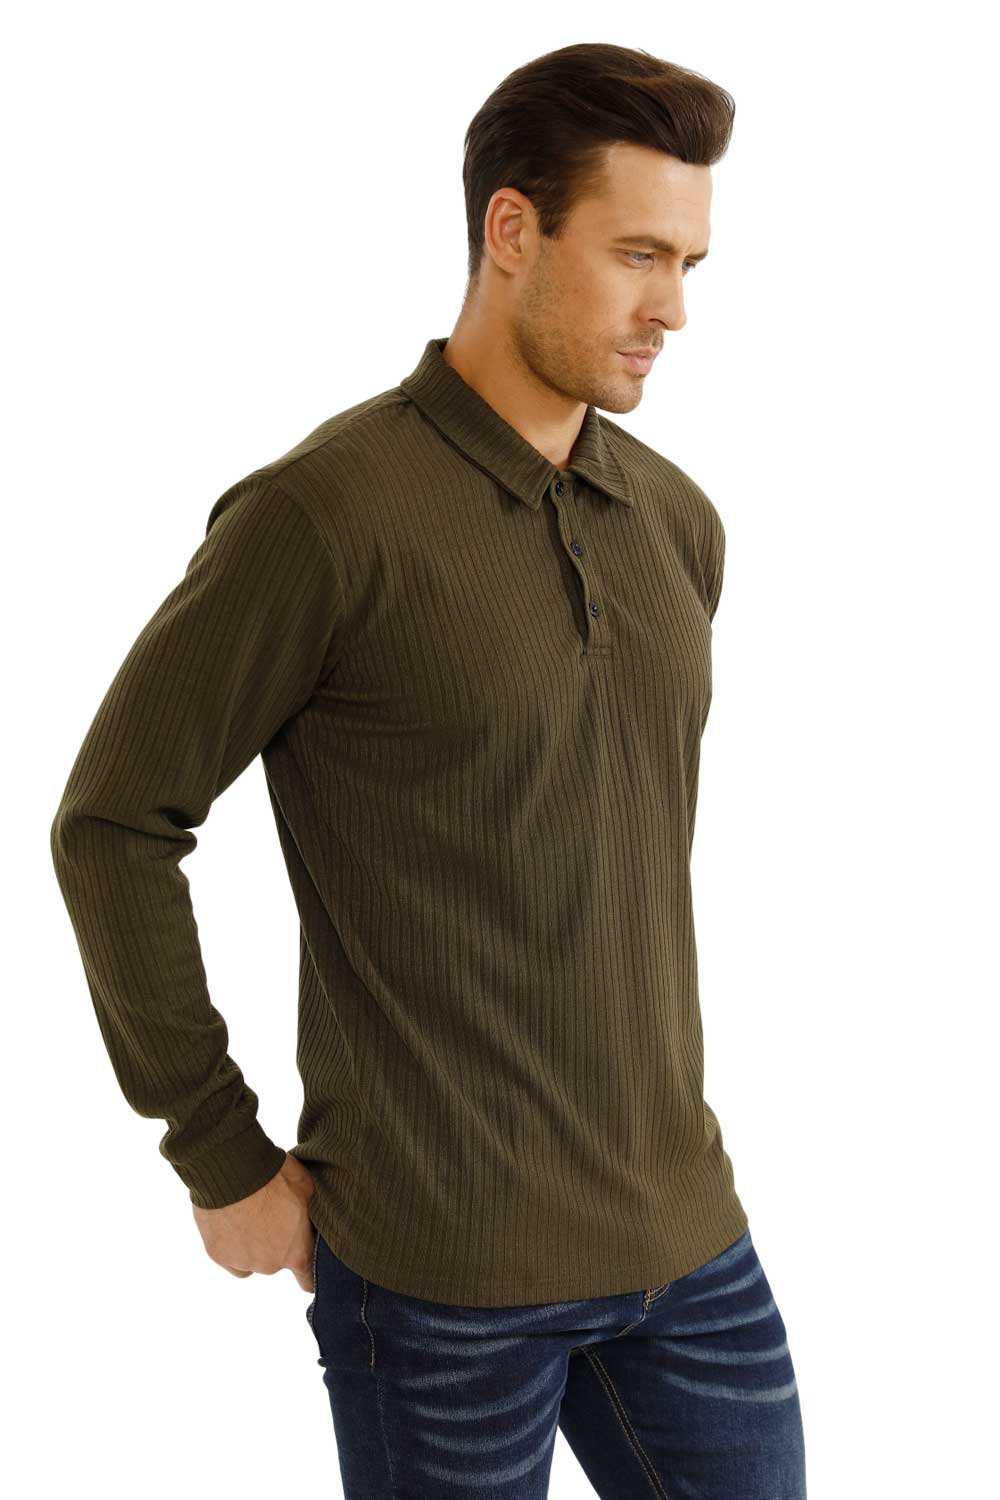 Gingtto Classic Fashion Polo Shirts for Men: Effortless Sophistication